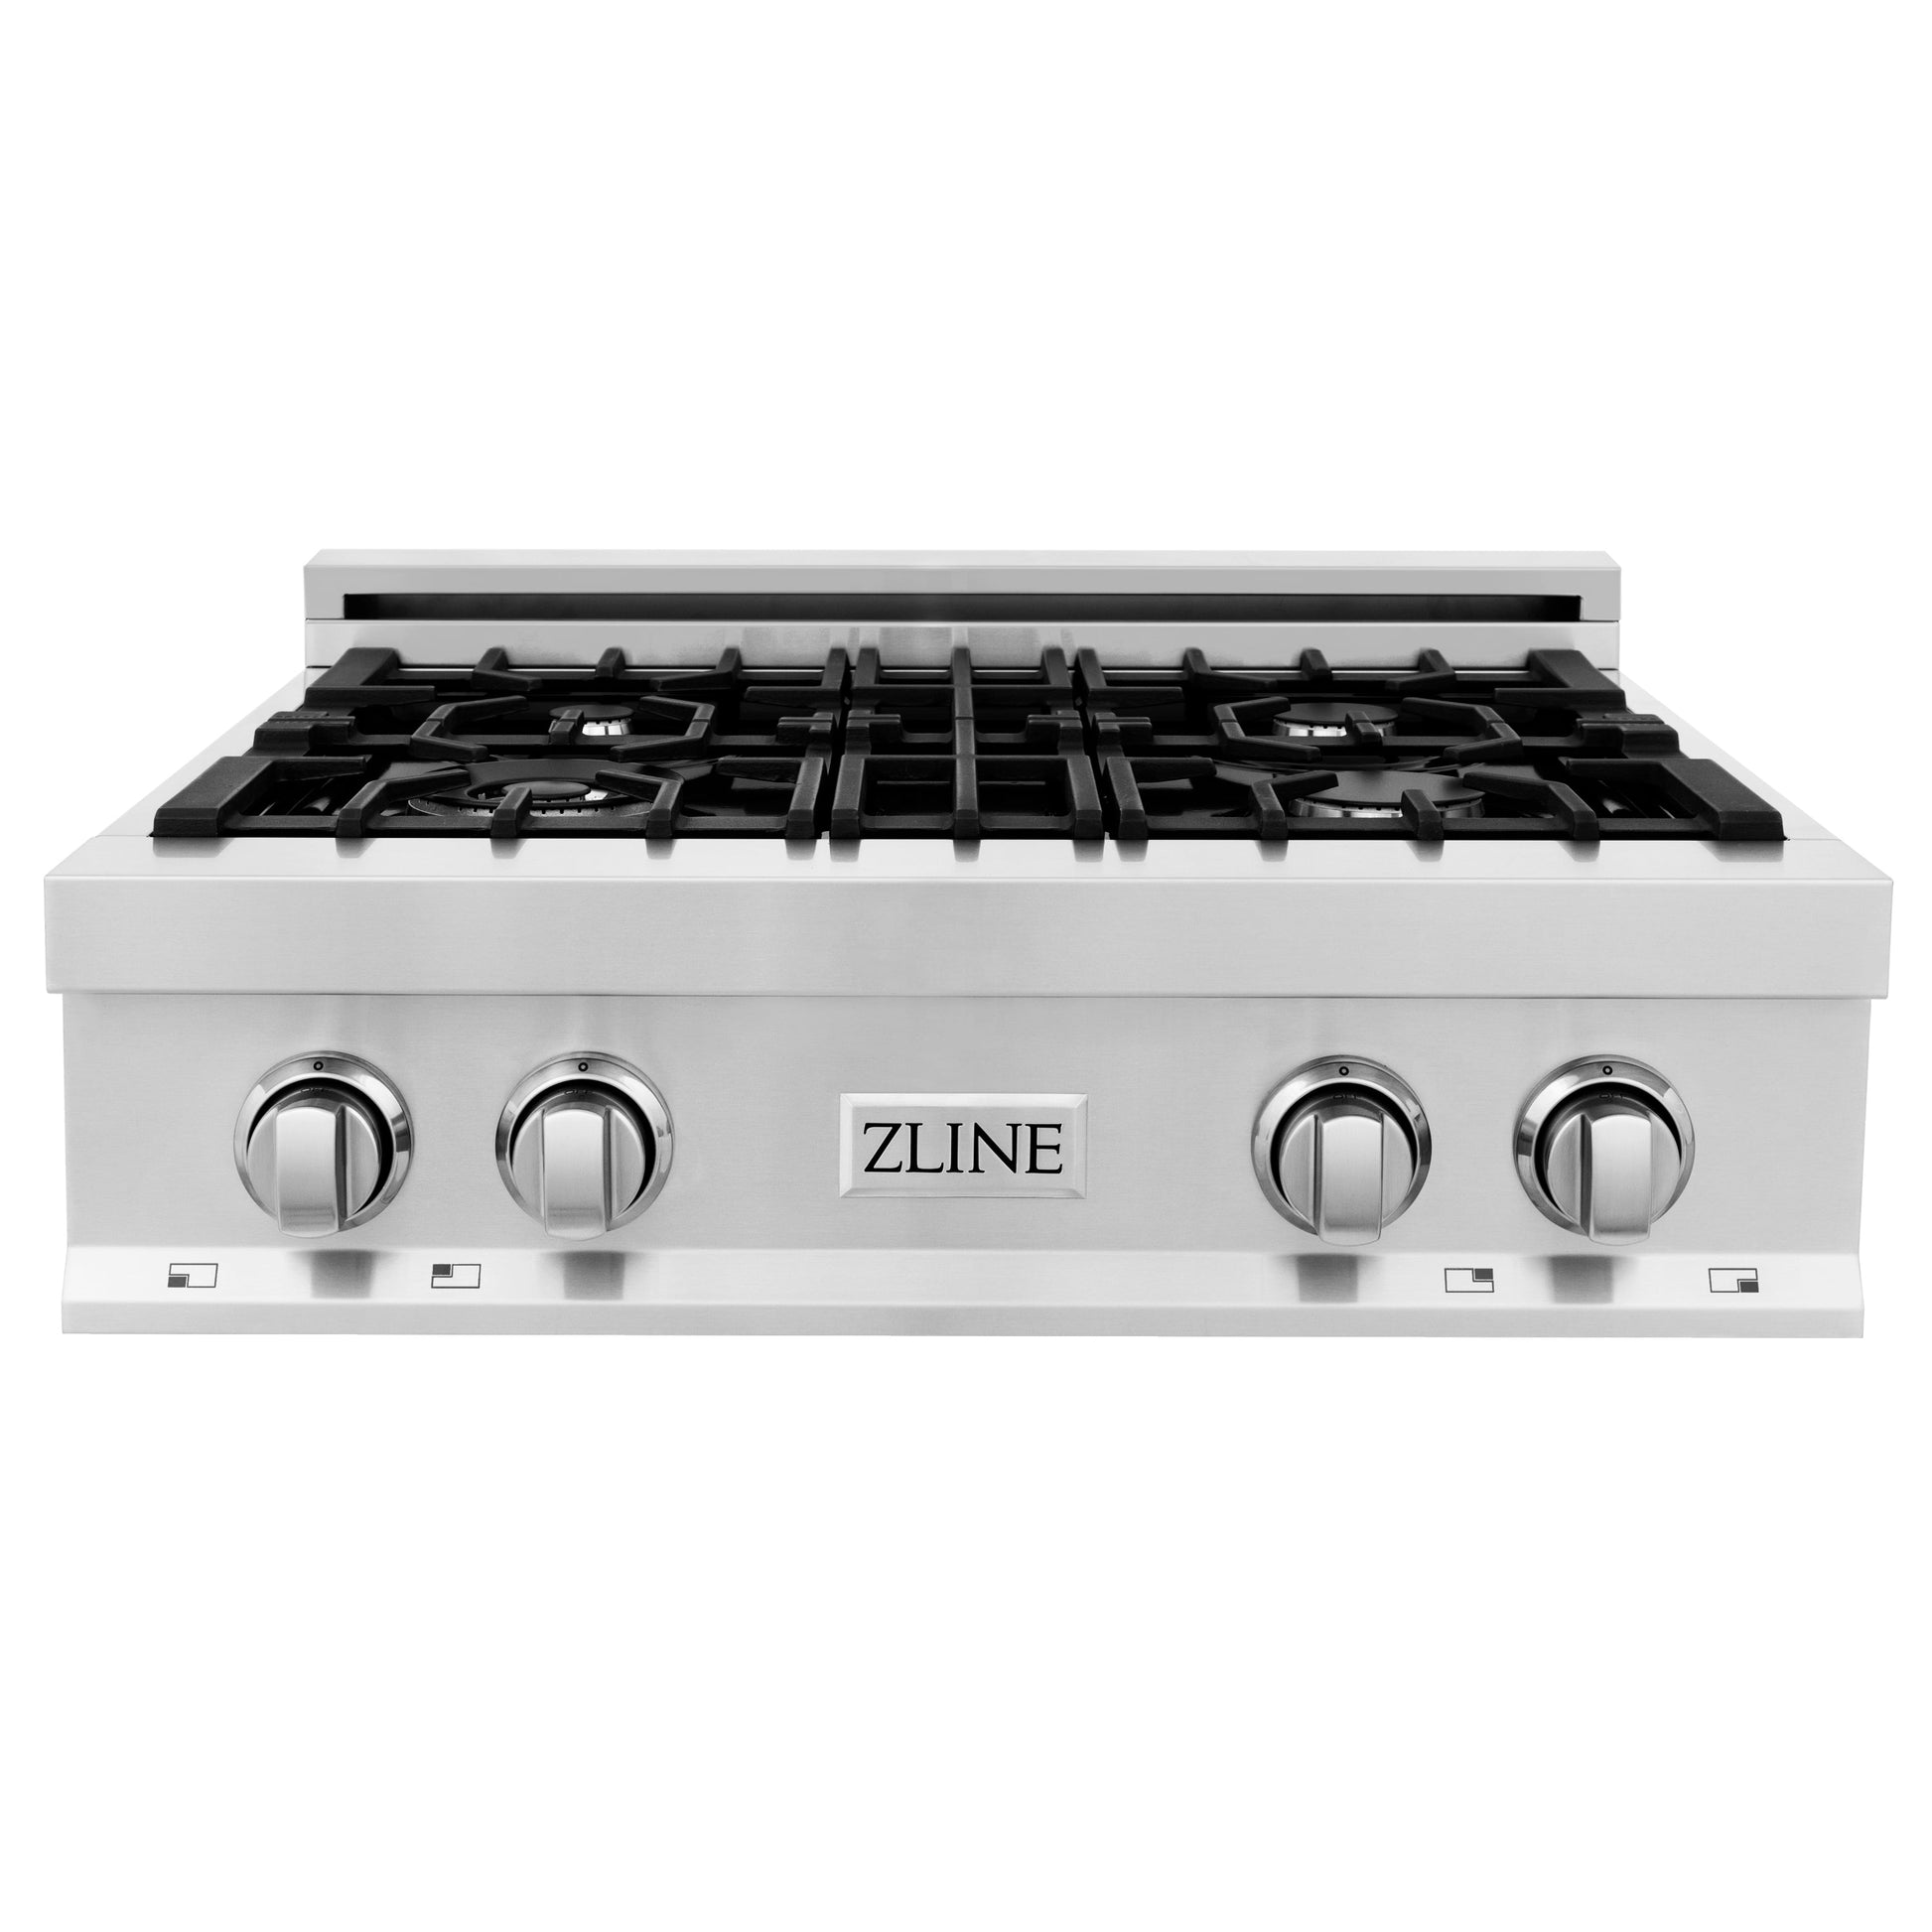 ZLINE 5-Appliance Kitchen Package with Refrigeration, 30" Stainless Steel Rangetop, 30" Range Hood, 30" Single Wall Oven, and 24" Tall Tub Dishwasher